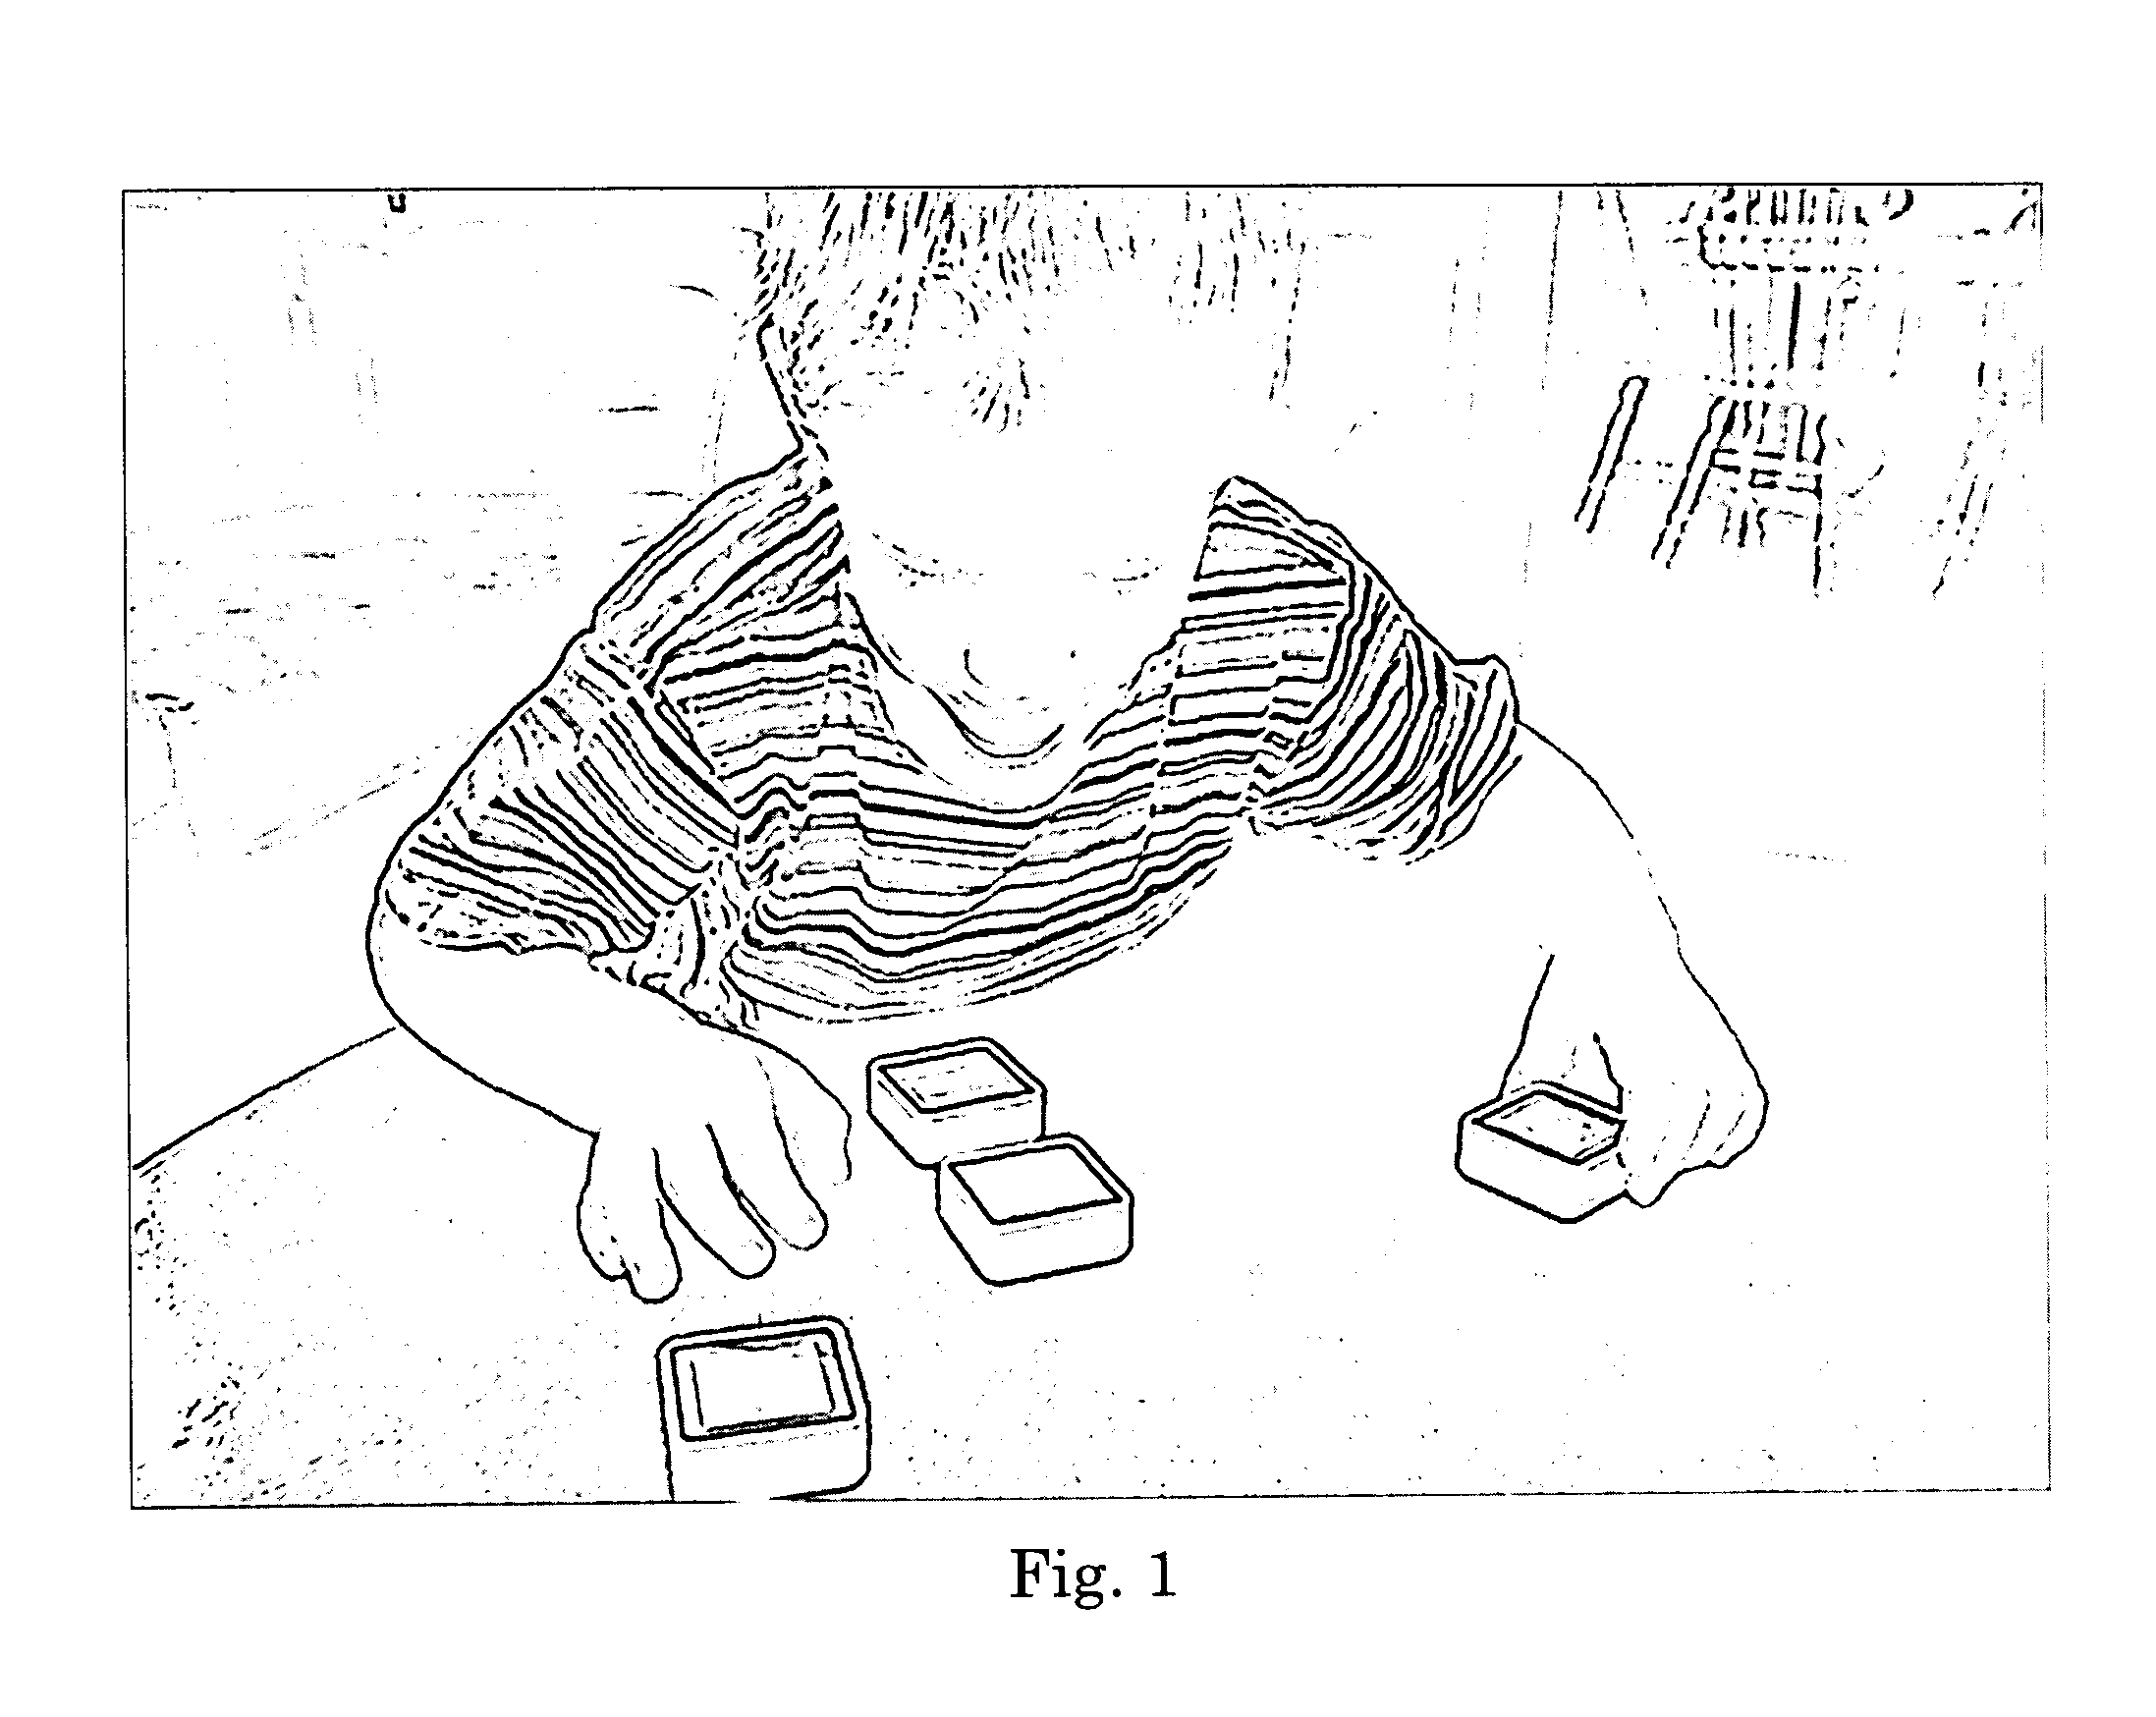 Cognitive assessment and treatment platform utilizing a distributed tangible-graphical user interface device